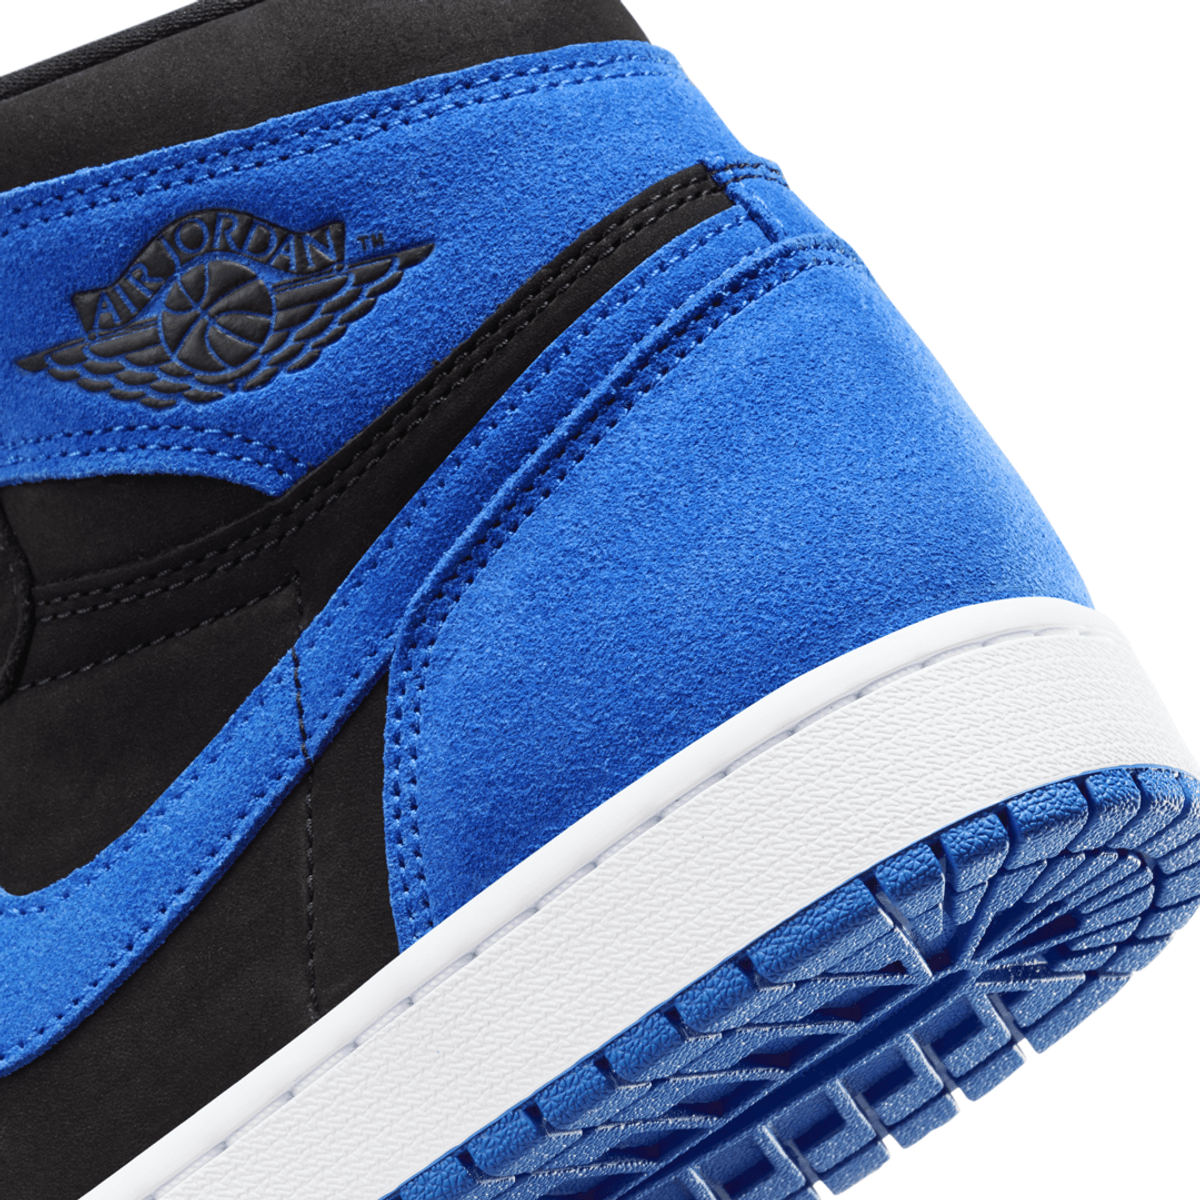 Official Images of the Air Jordan 1 Royal Reimagined